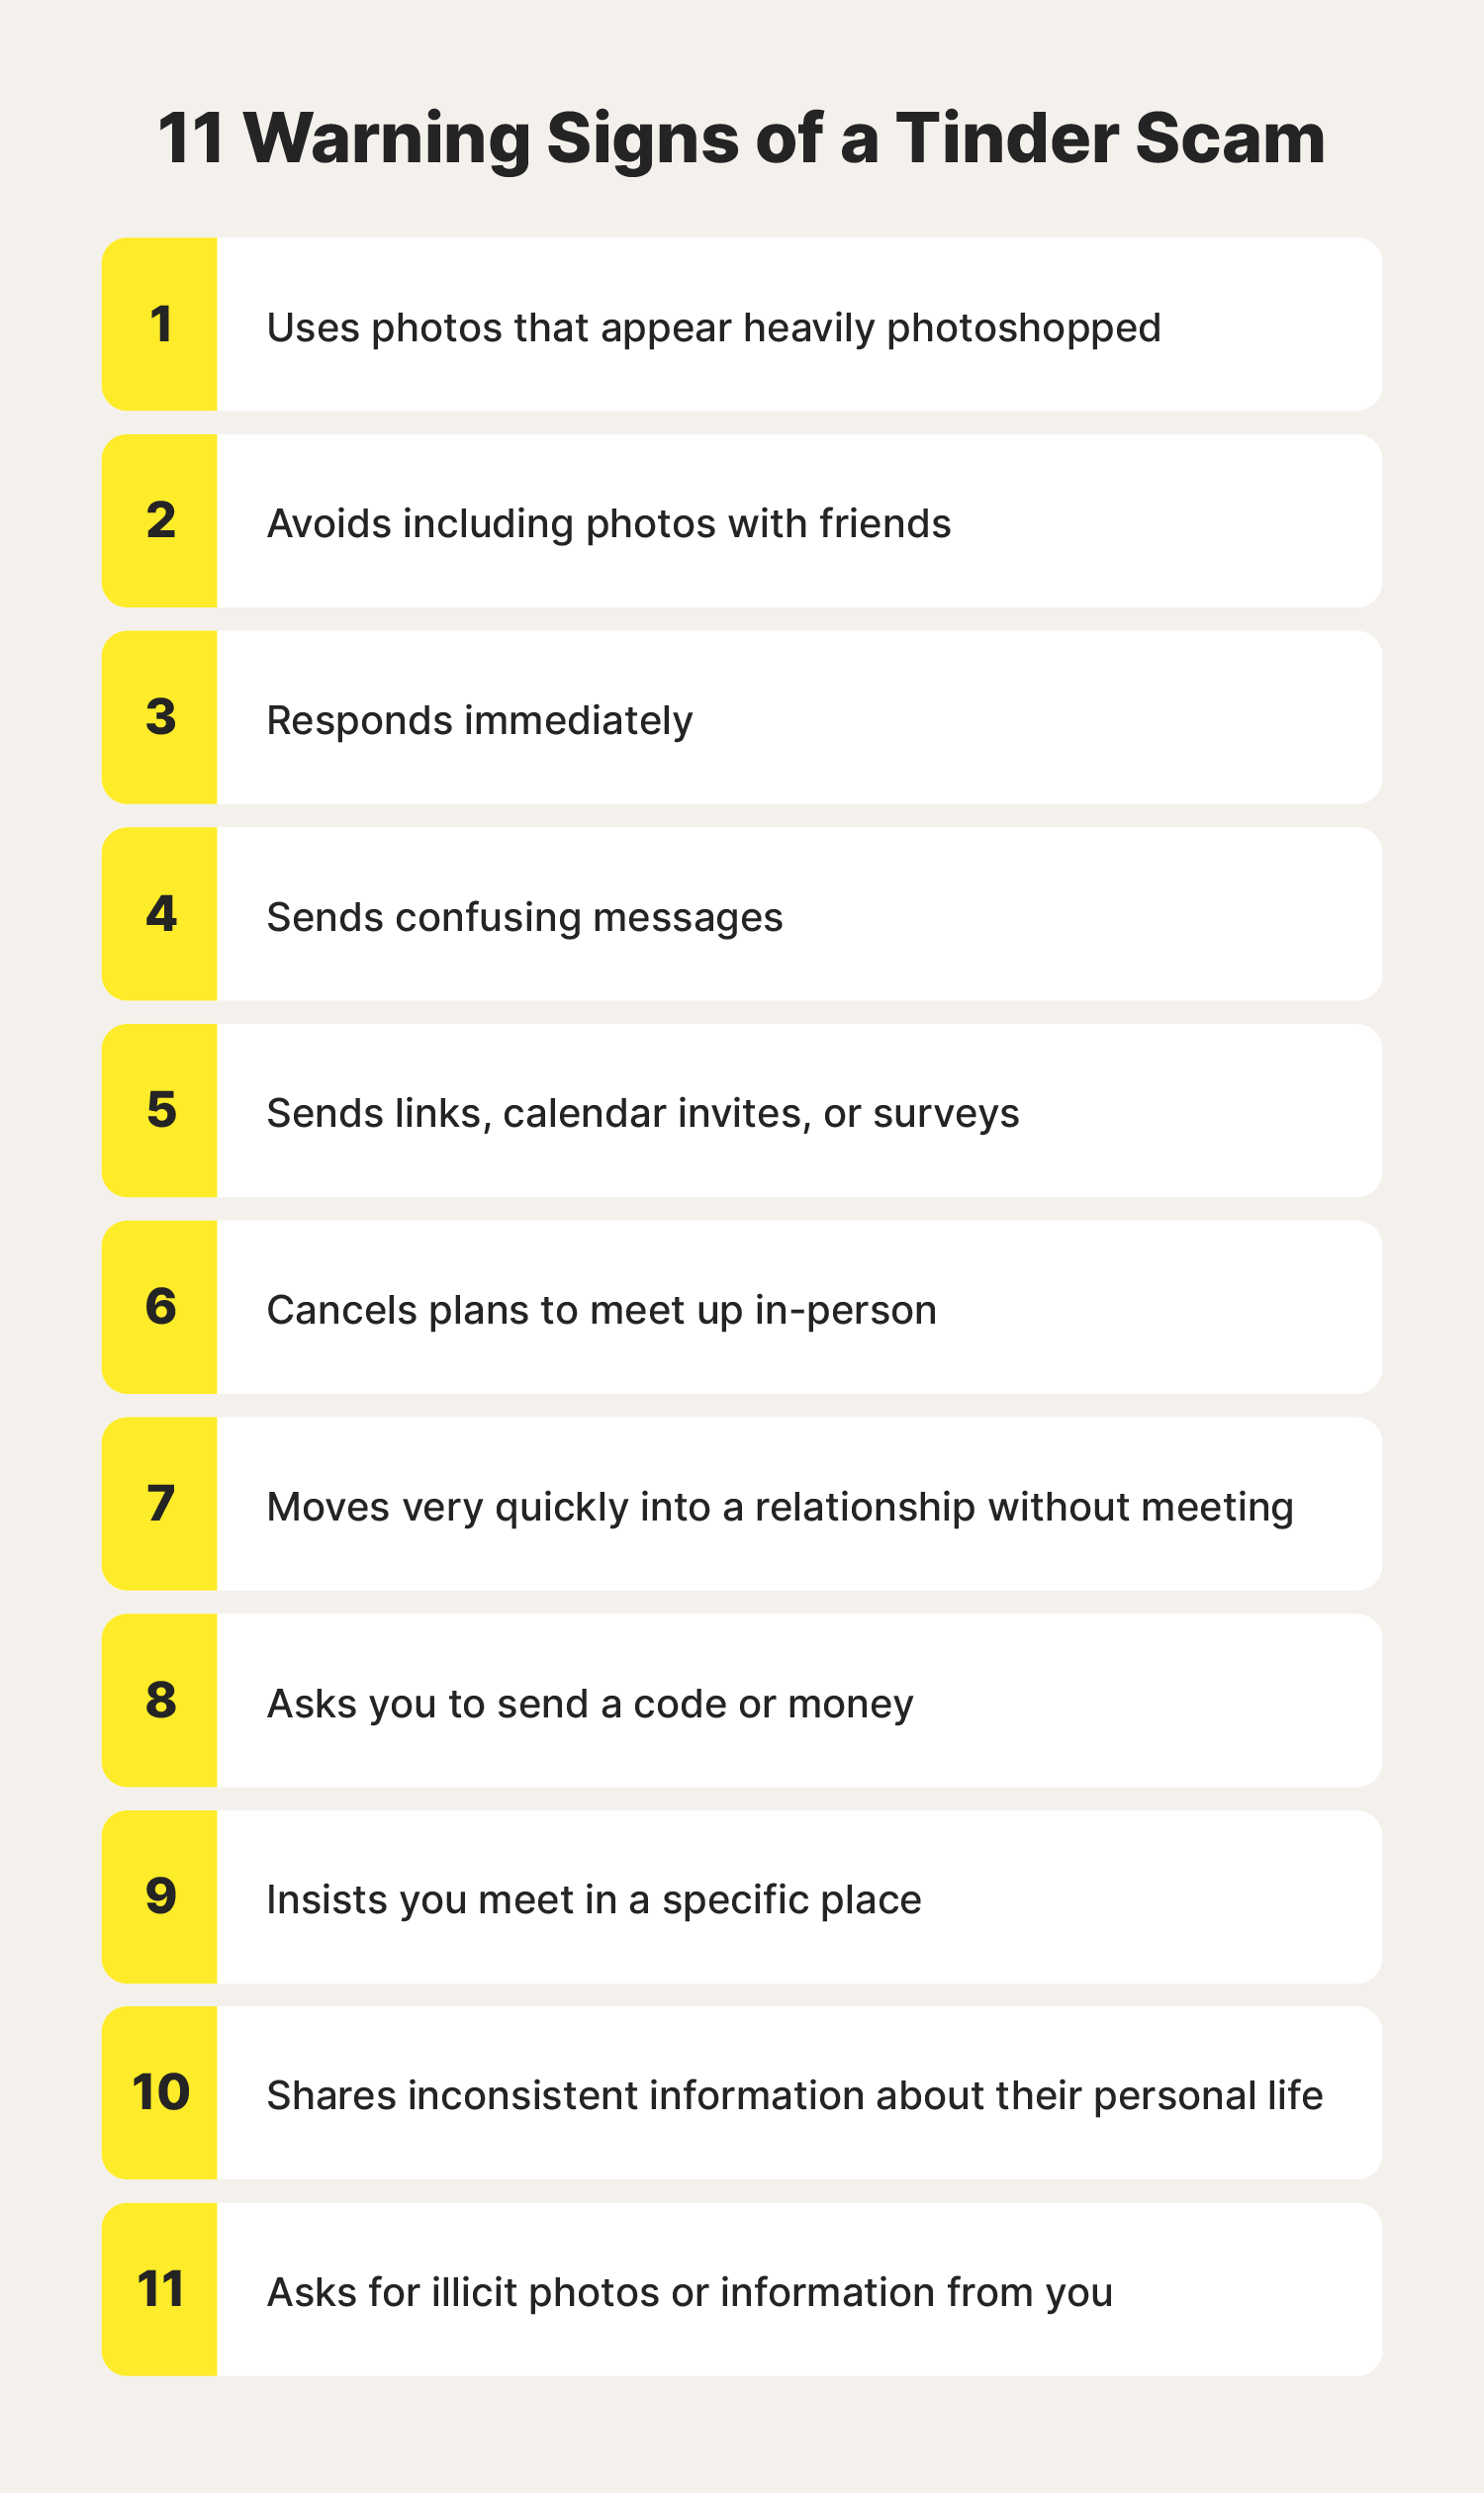 Image shows the 11 signs someone might be a Tinder scammer.